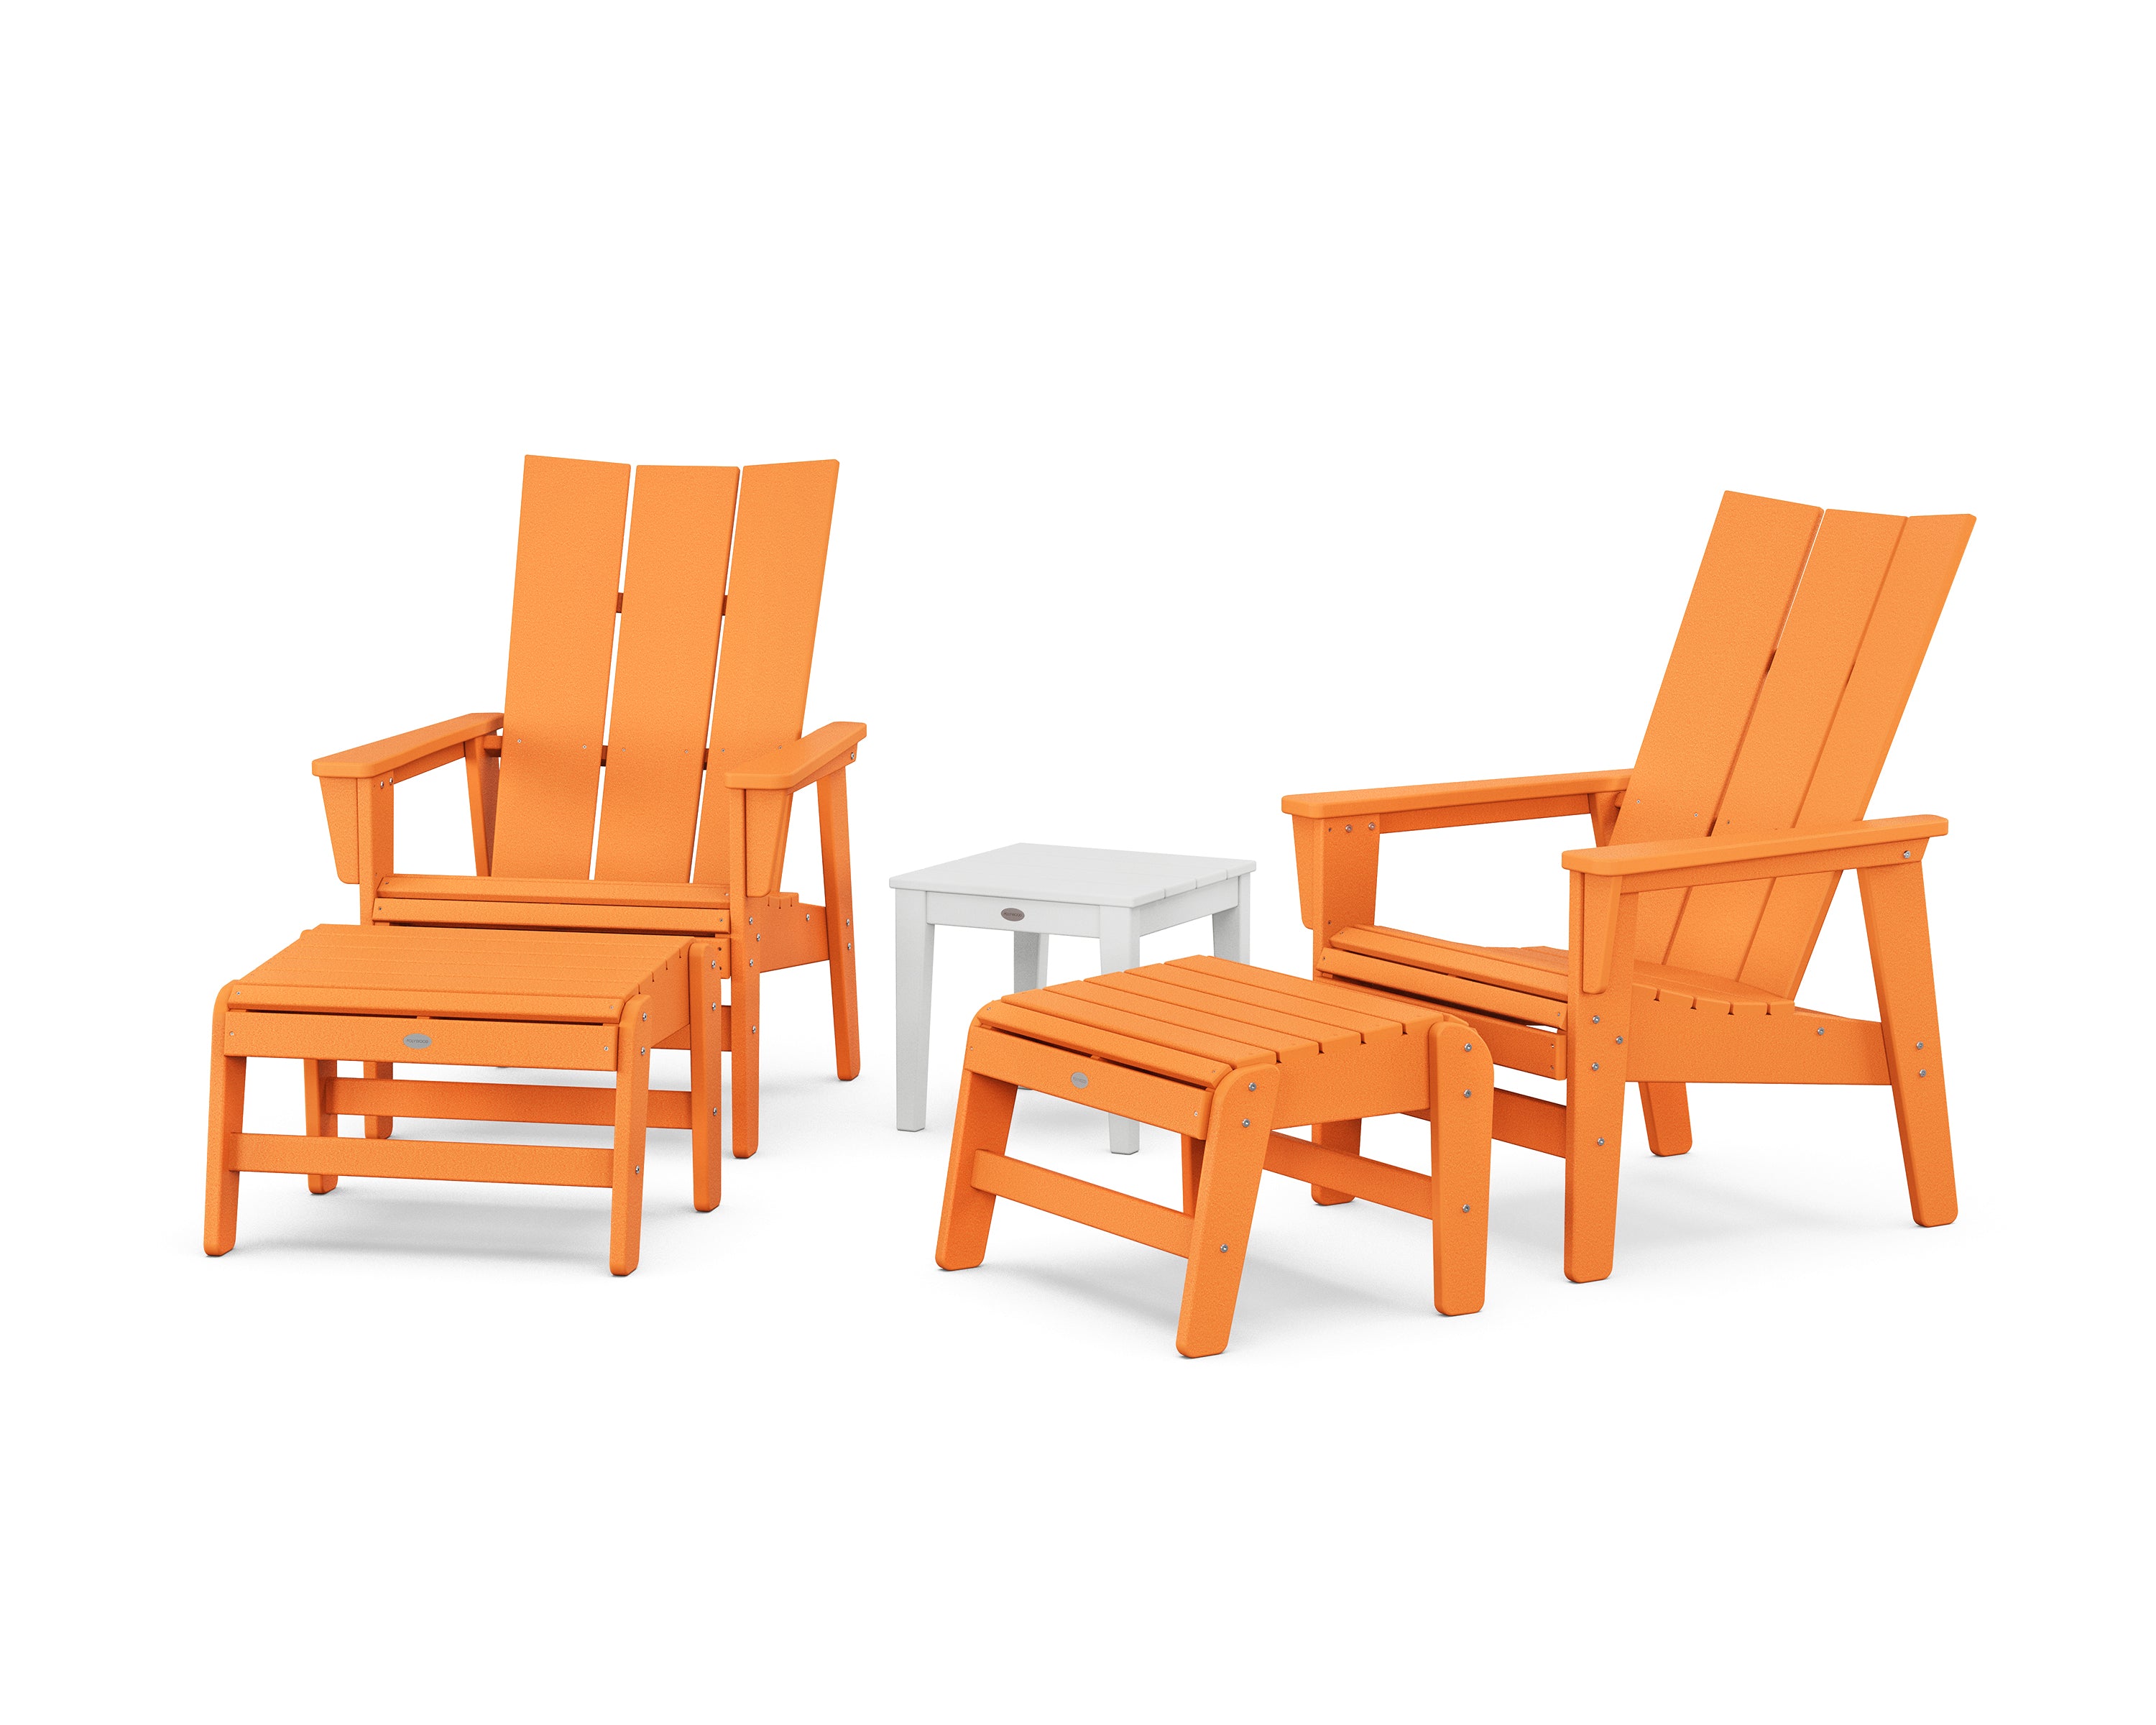 POLYWOOD® 5-Piece Modern Grand Upright Adirondack Set with Ottomans and Side Table in Tangerine / White